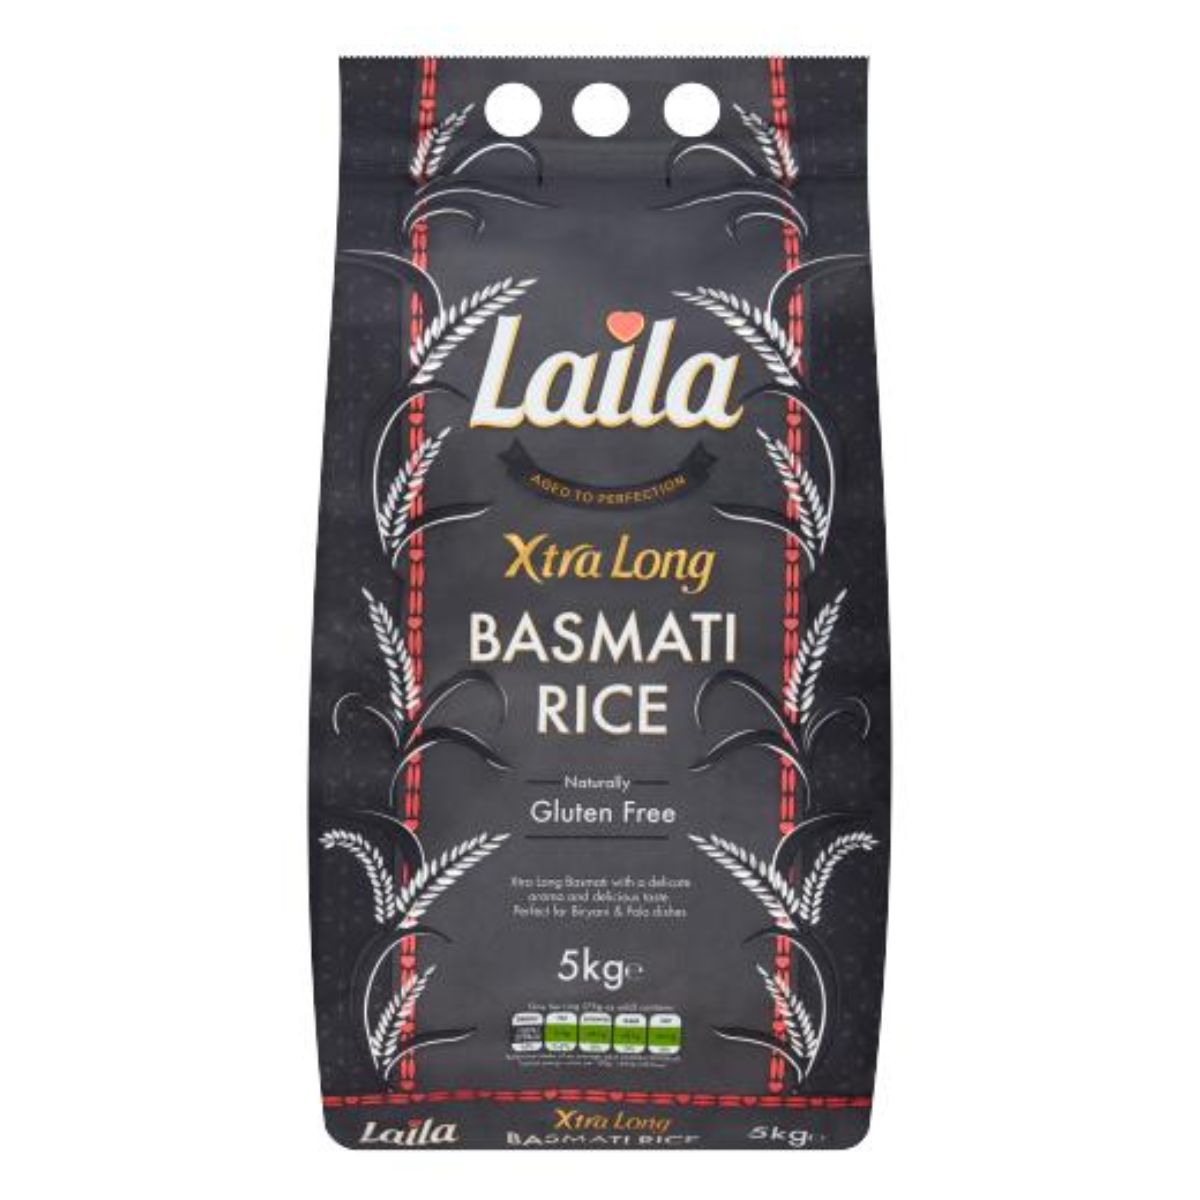 Laila - Xtra Long Basmati Rice - 5kg is the product you're looking for in the sentence.